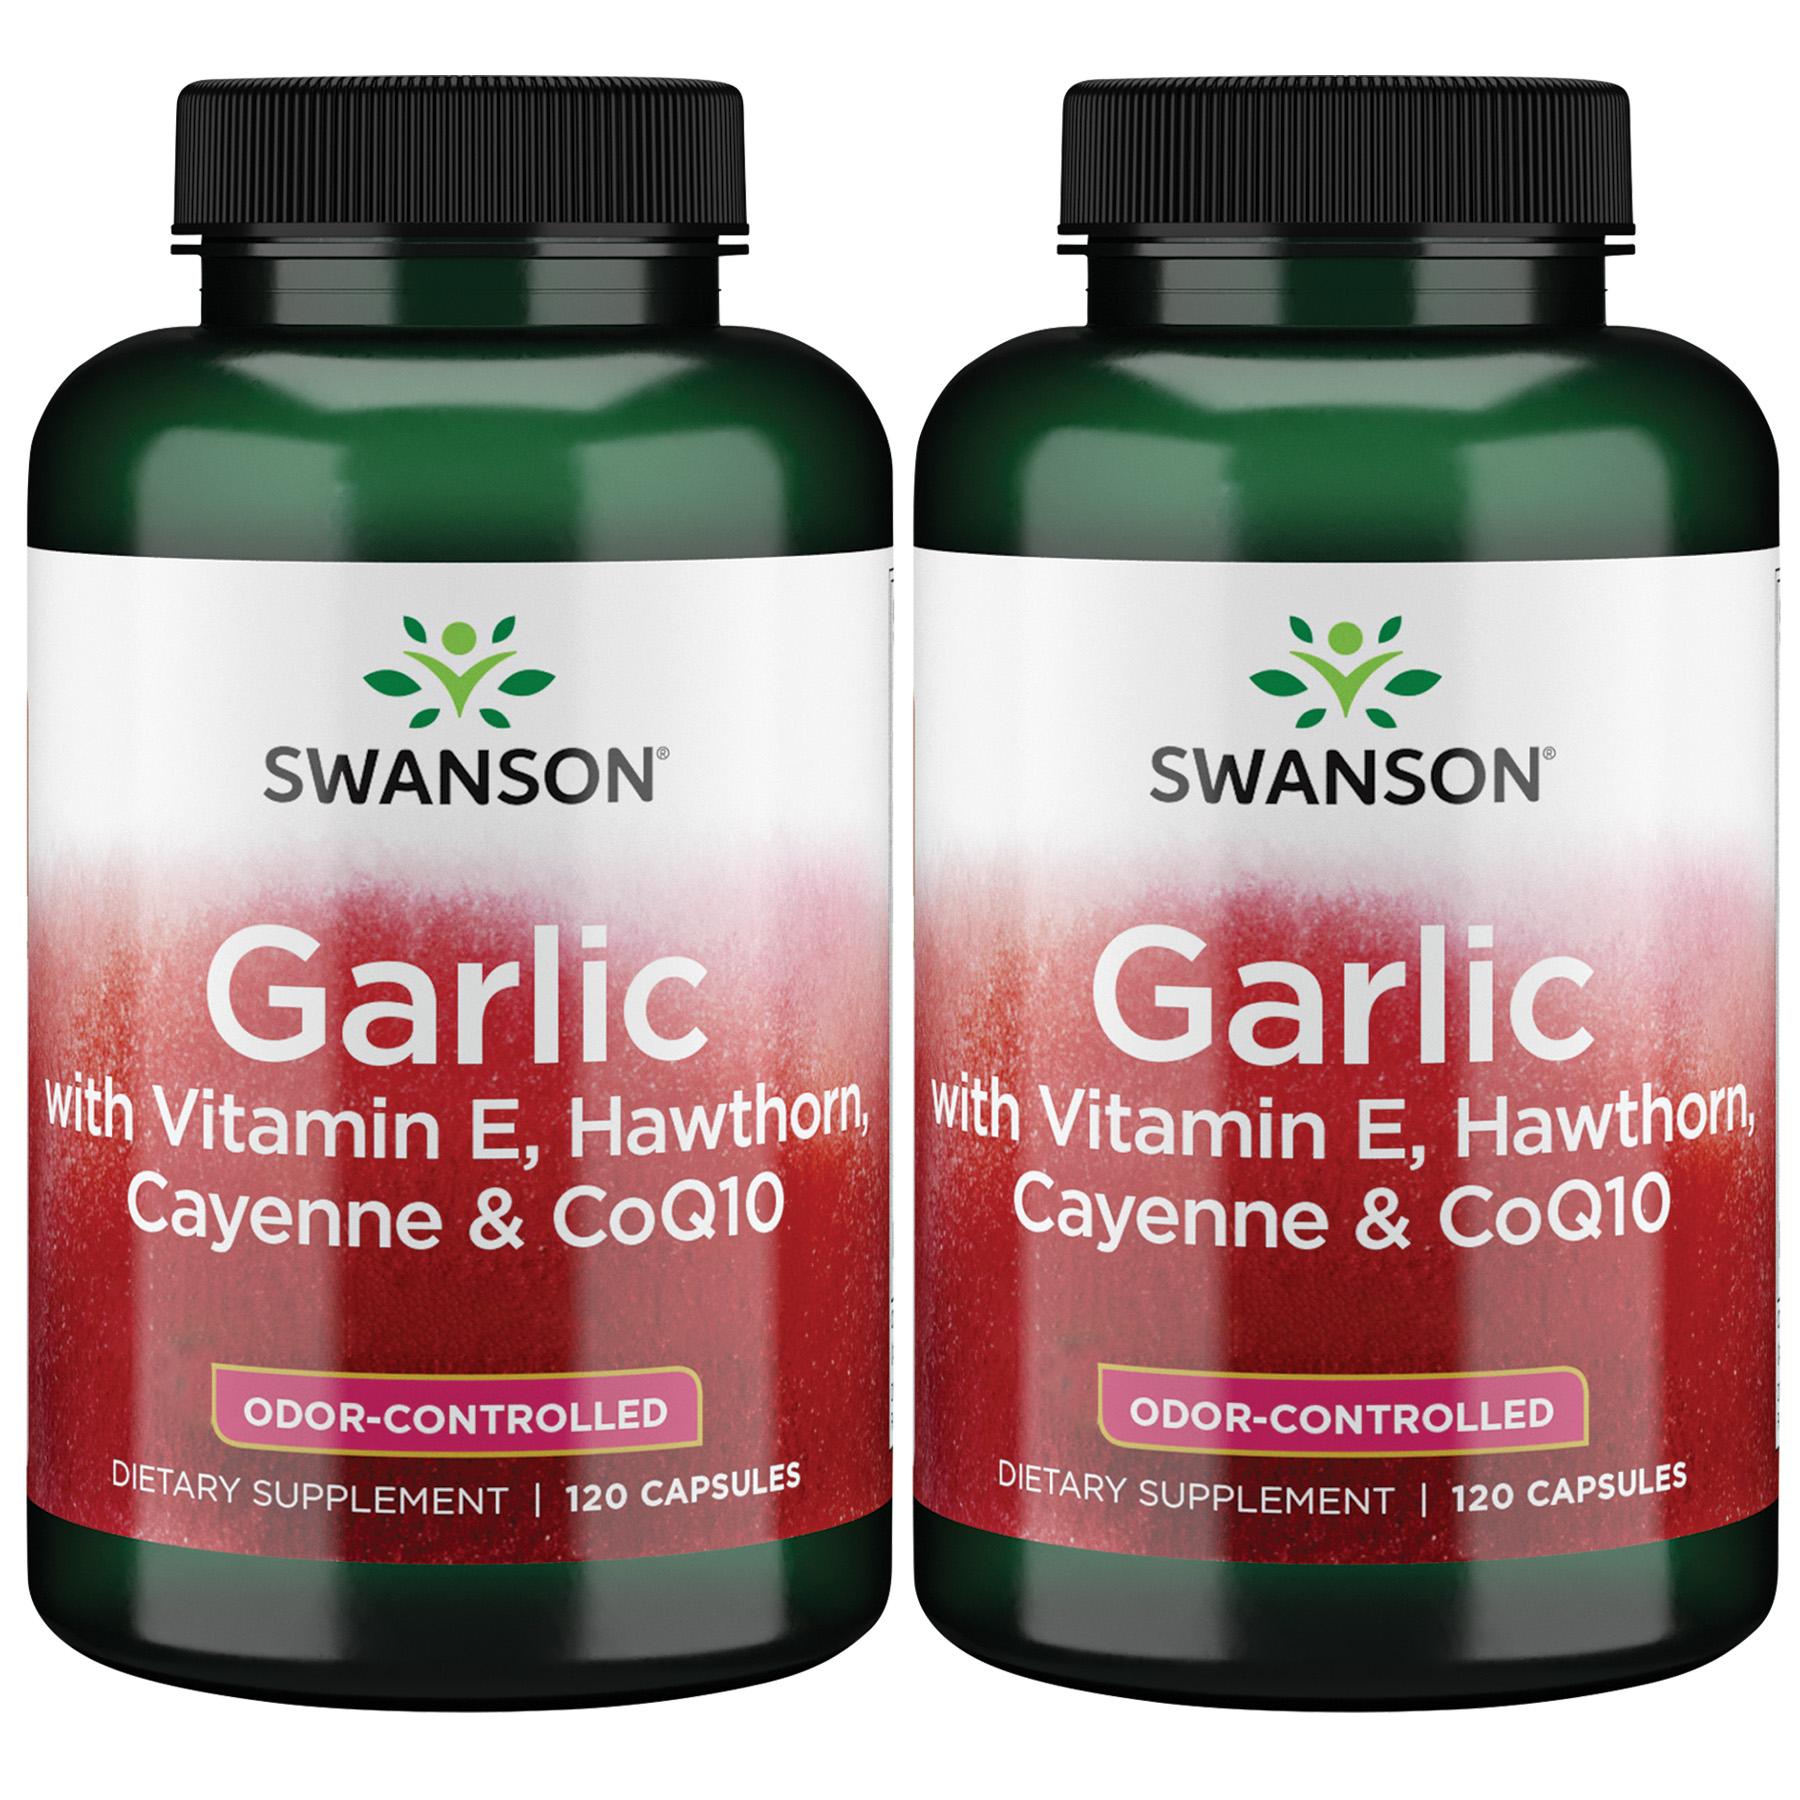 Swanson Best Garlic Supplements with Vitamin E, Hawthorn, Cayenne & Coq10 - Odor-Controlled 2 Pack 120 Caps